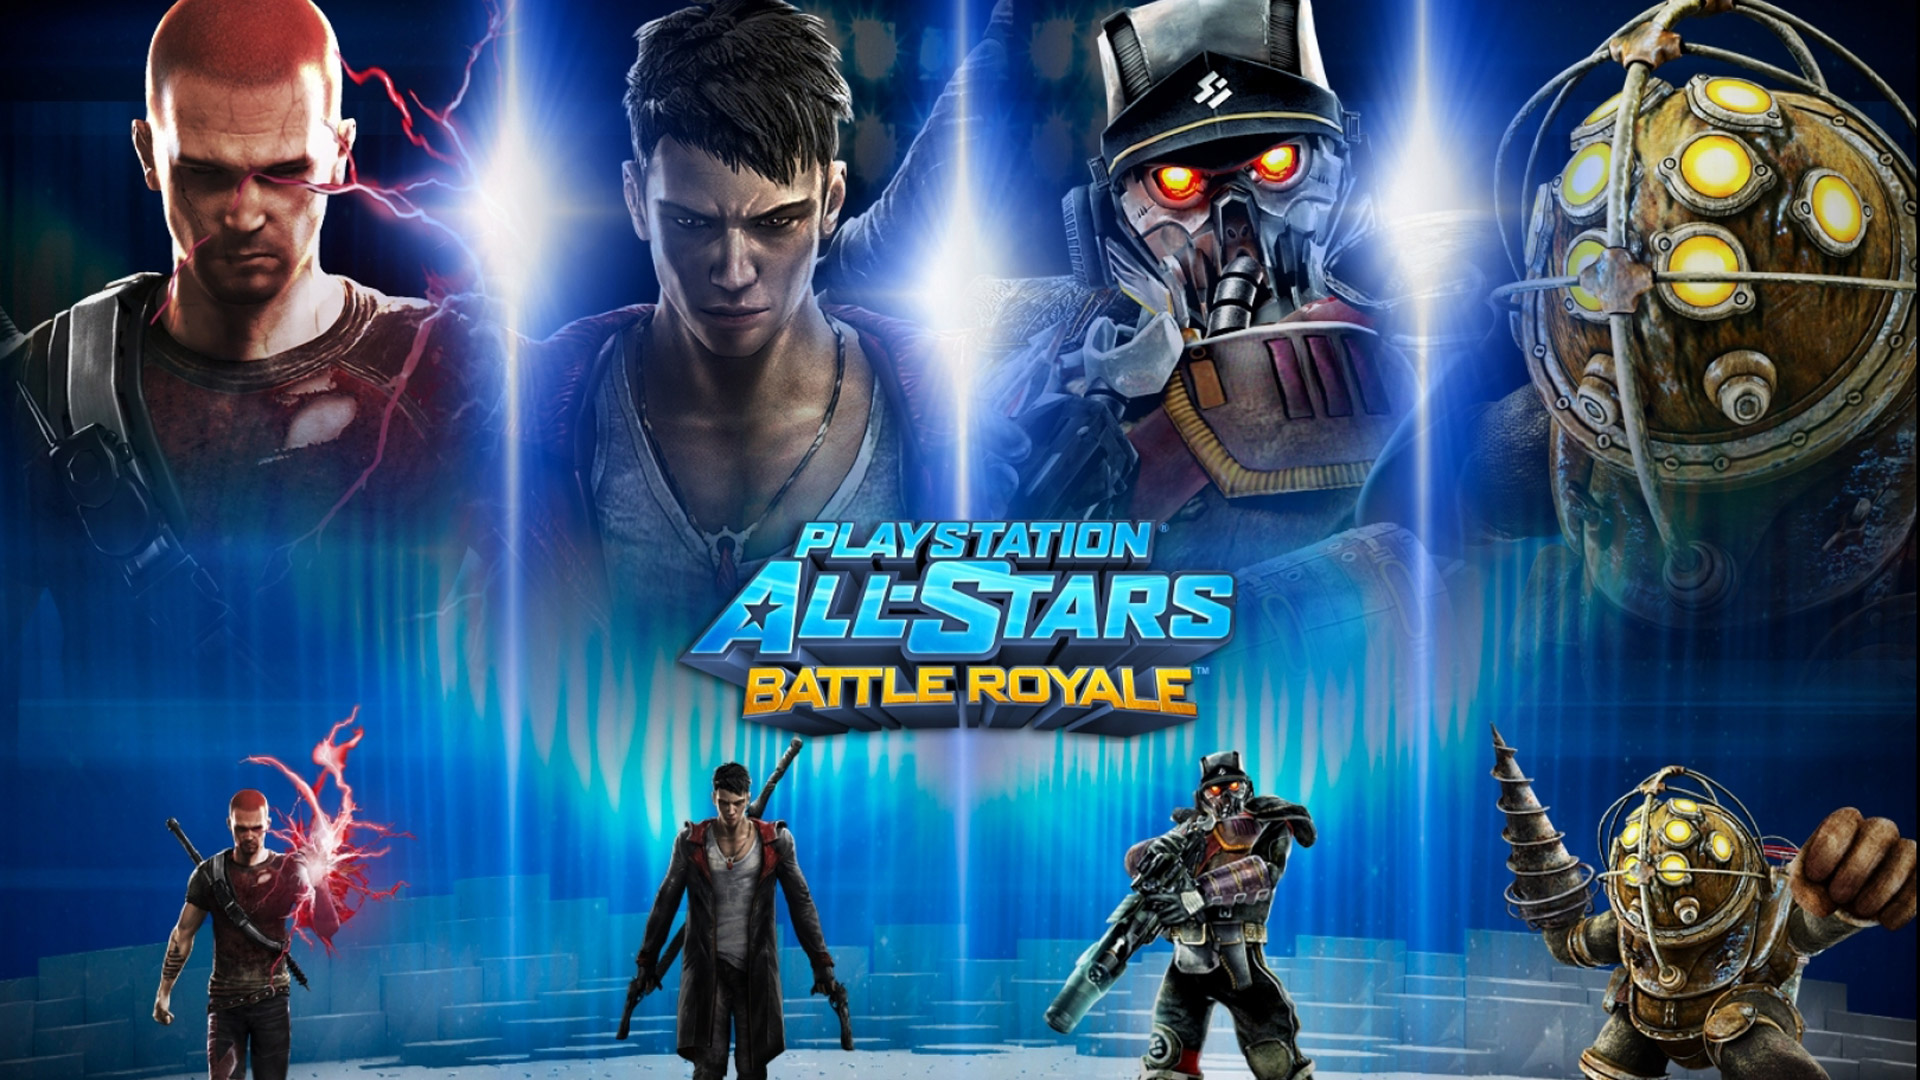 Free PlayStation All Stars Battle Royale Wallpaper In 1920x1080